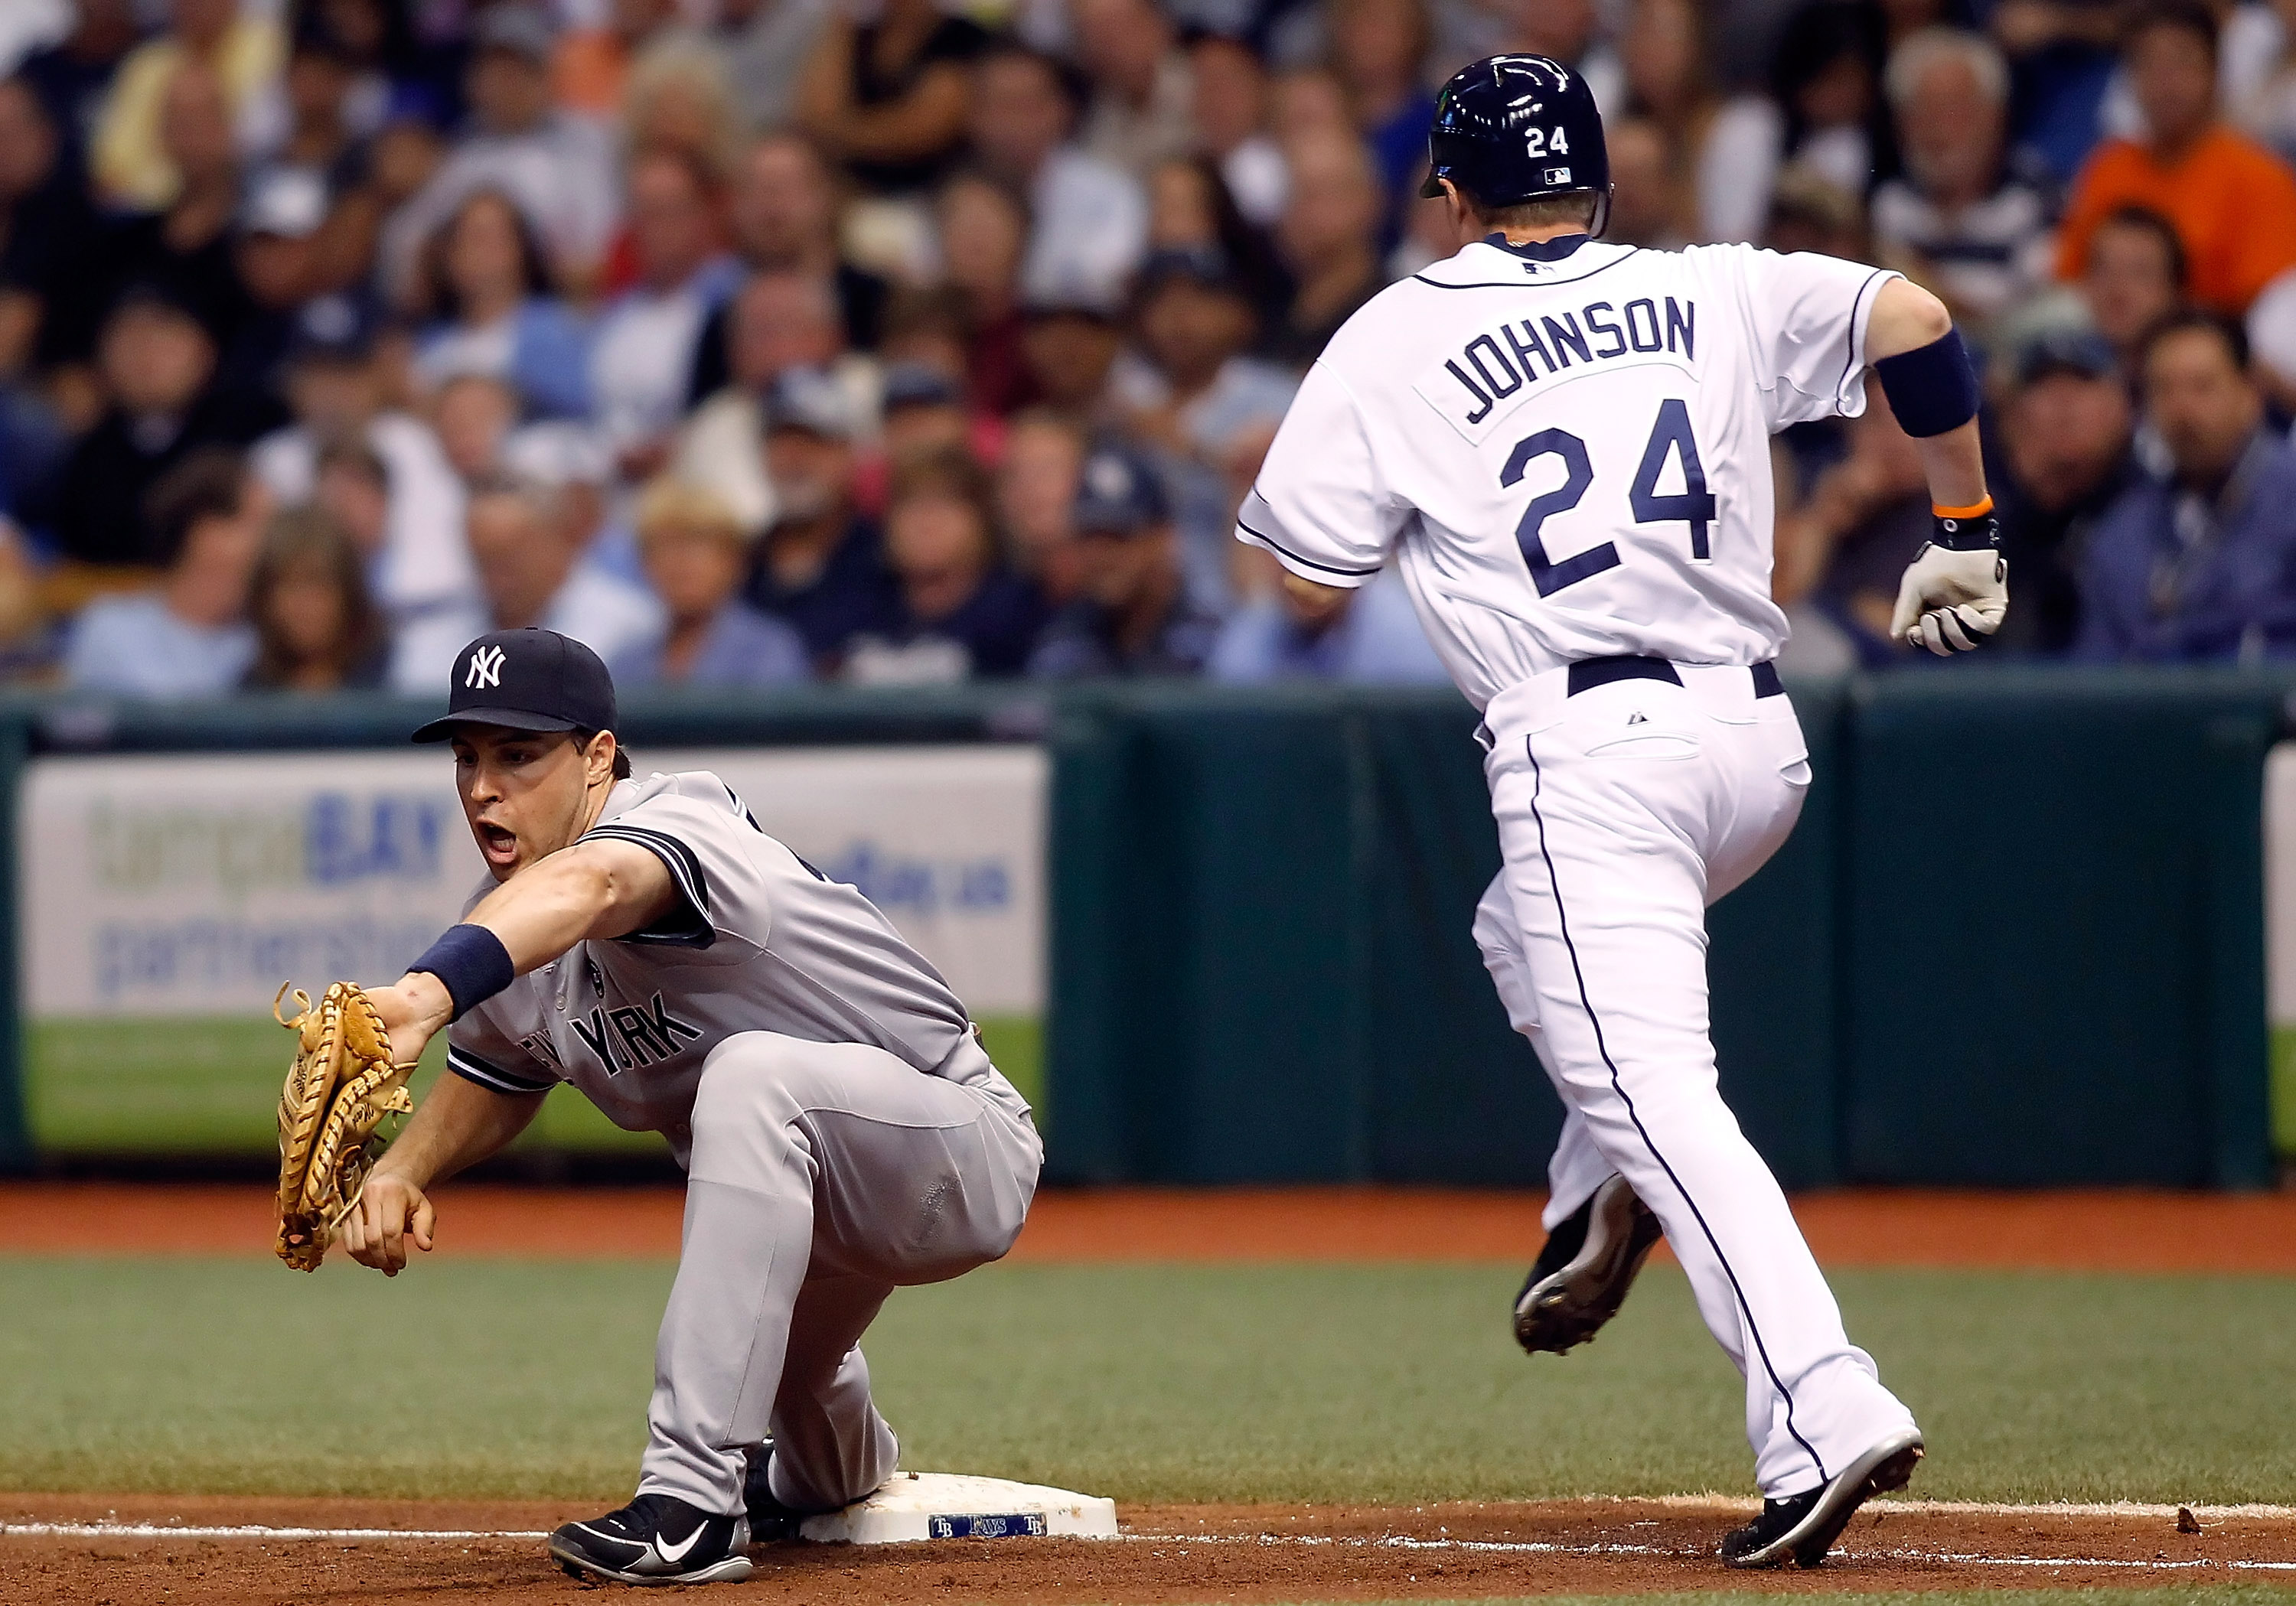 ST. PETERSBURG, FL - SEPTEMBER 15:  First baseman Mark Teixeira #25 of the New York Yankees takes the throw at first for an out as Dan Johnson #24 of the Tampa Bay Rays cannot beat the throw during the game at Tropicana Field on September 15, 2010 in St. 